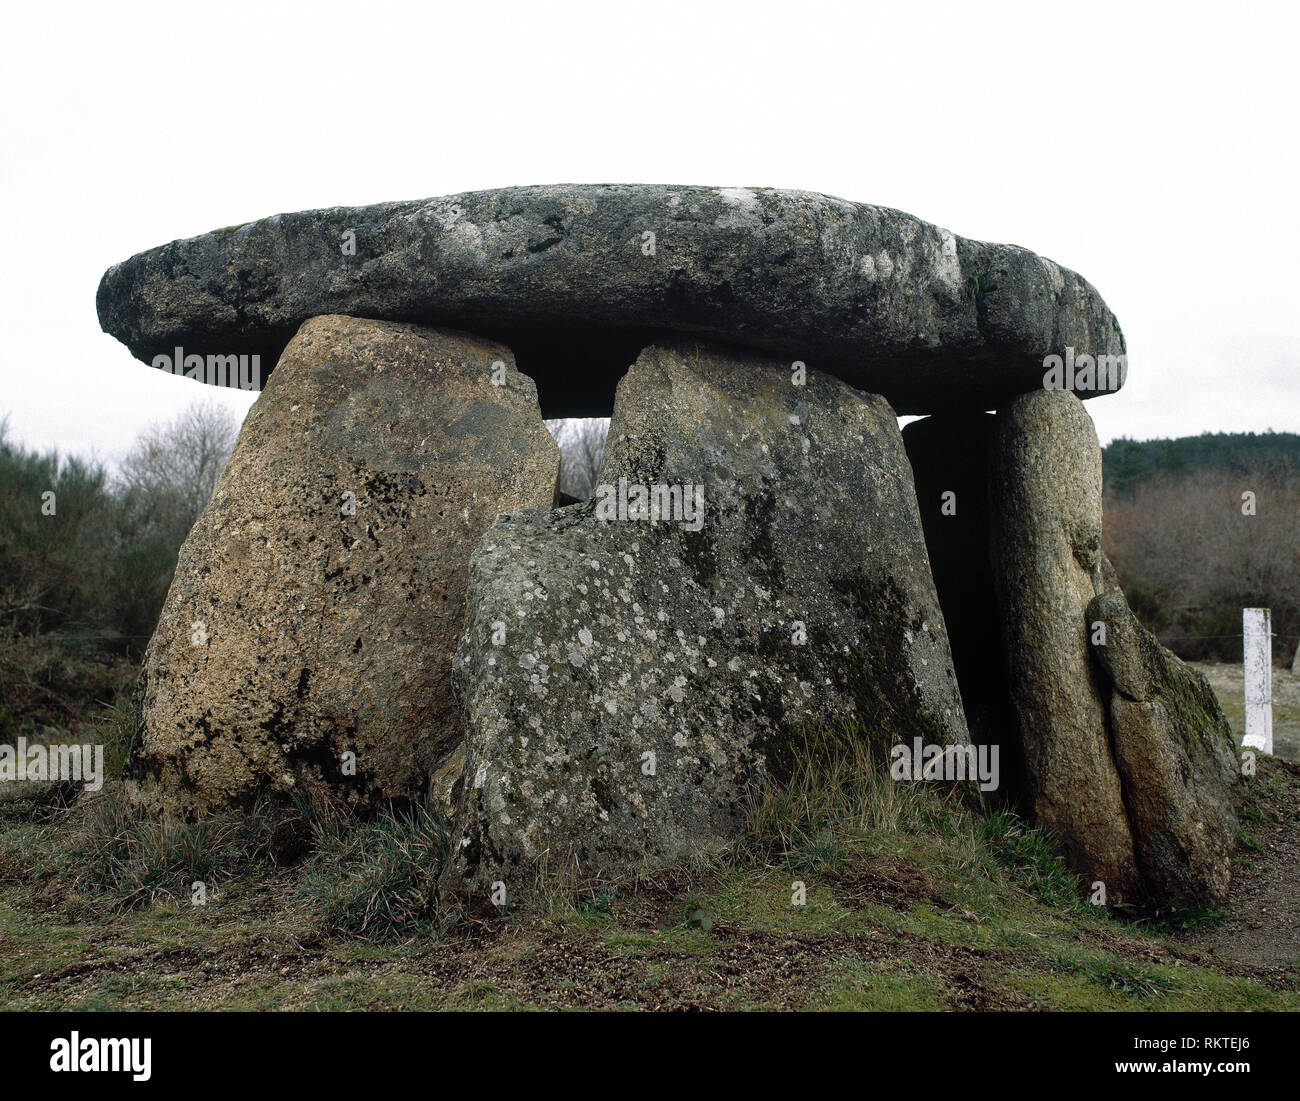 Prehistory. Metal Age. Megalithic Art. Dolmens of Maus de Salas in Muiños, province of  Ourense, Galicia, Spain. 3500-2000 BC. Funeral monument. (Monument moved from its original location by the construction of damming of Salas). Stock Photo